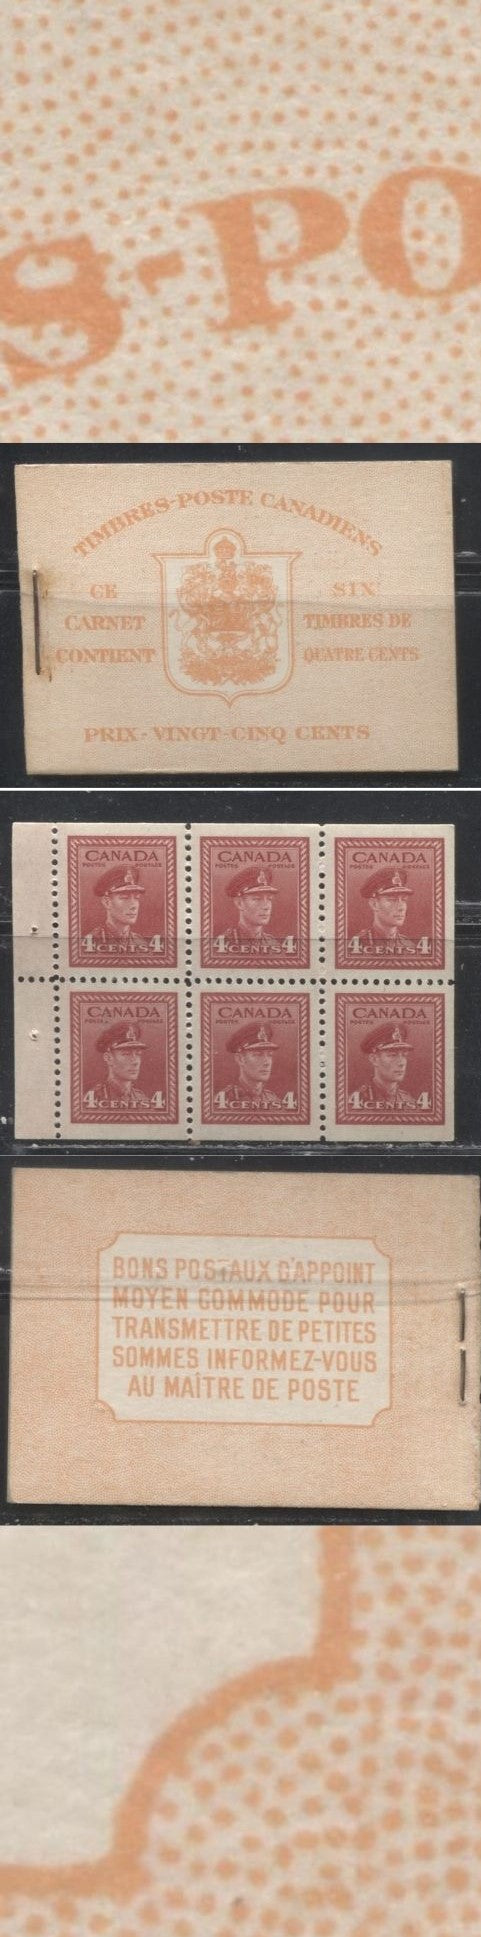 Lot 87 Canada #BK36d 1942-1949 War Issue Complete 25c, French Booklet Containing 1 Pane of 6 of 4c Carmine Red, Type II, Harris Front Cover Type IIu, Back Cover Div, 7c & 6c Rate Page